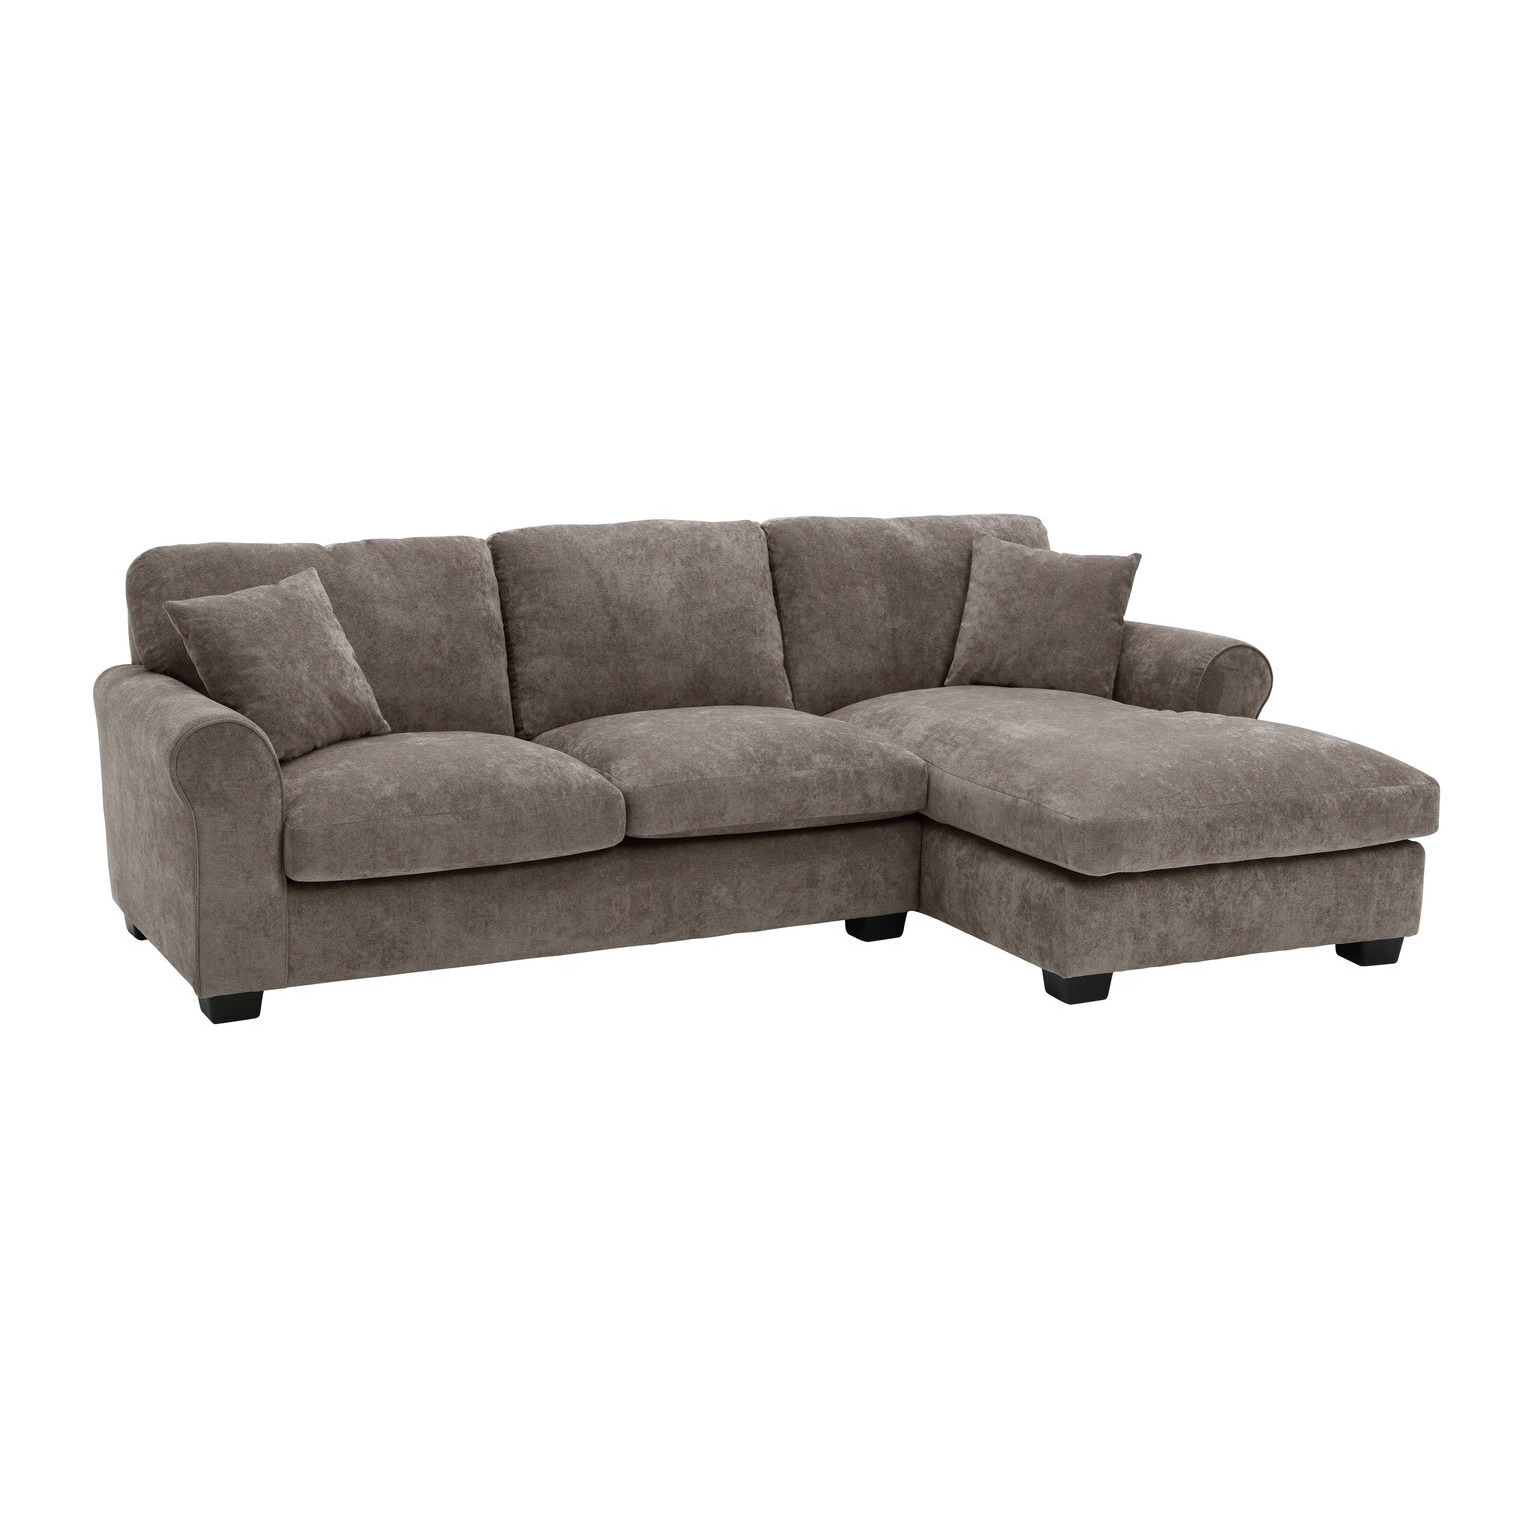 Argos Home Taylor Fabric Right Corner Chaise Sofa - Mink - image 1